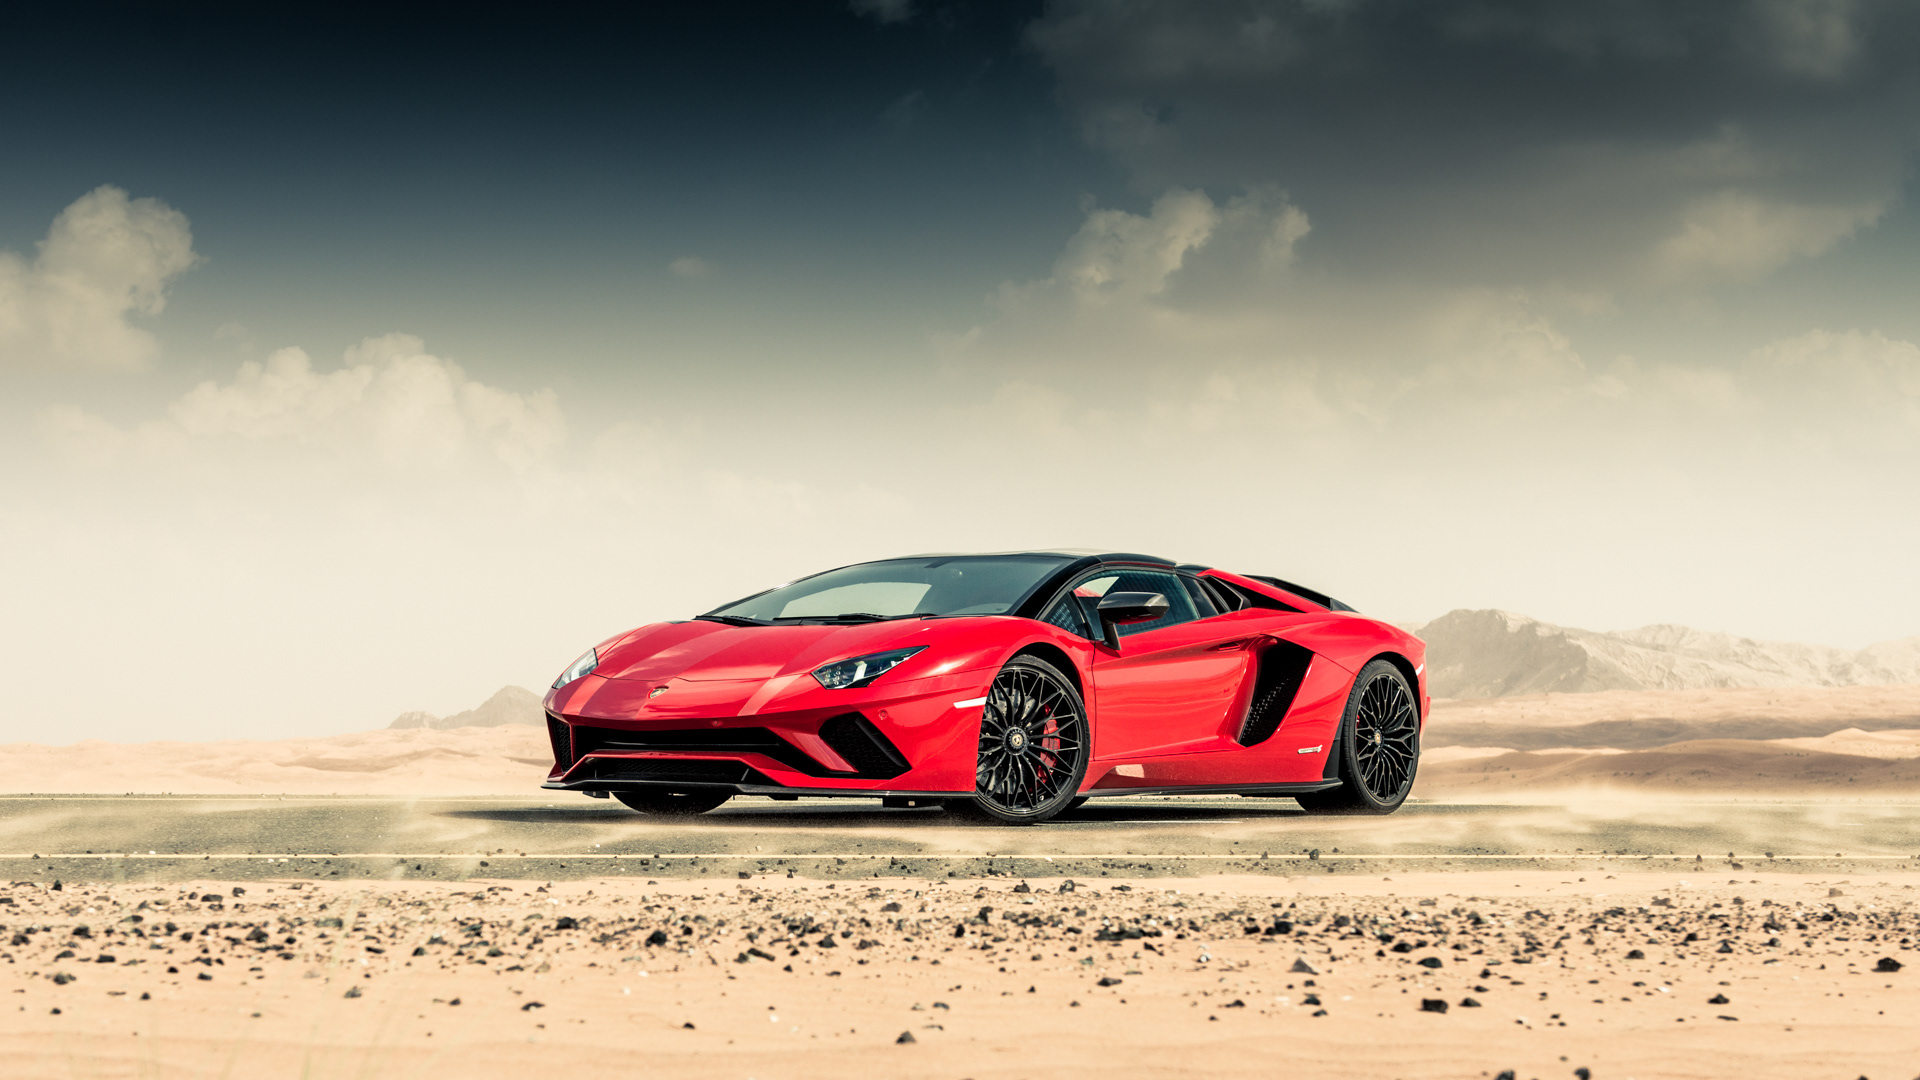 90+ Lamborghini Aventador S HD Wallpapers and Backgrounds